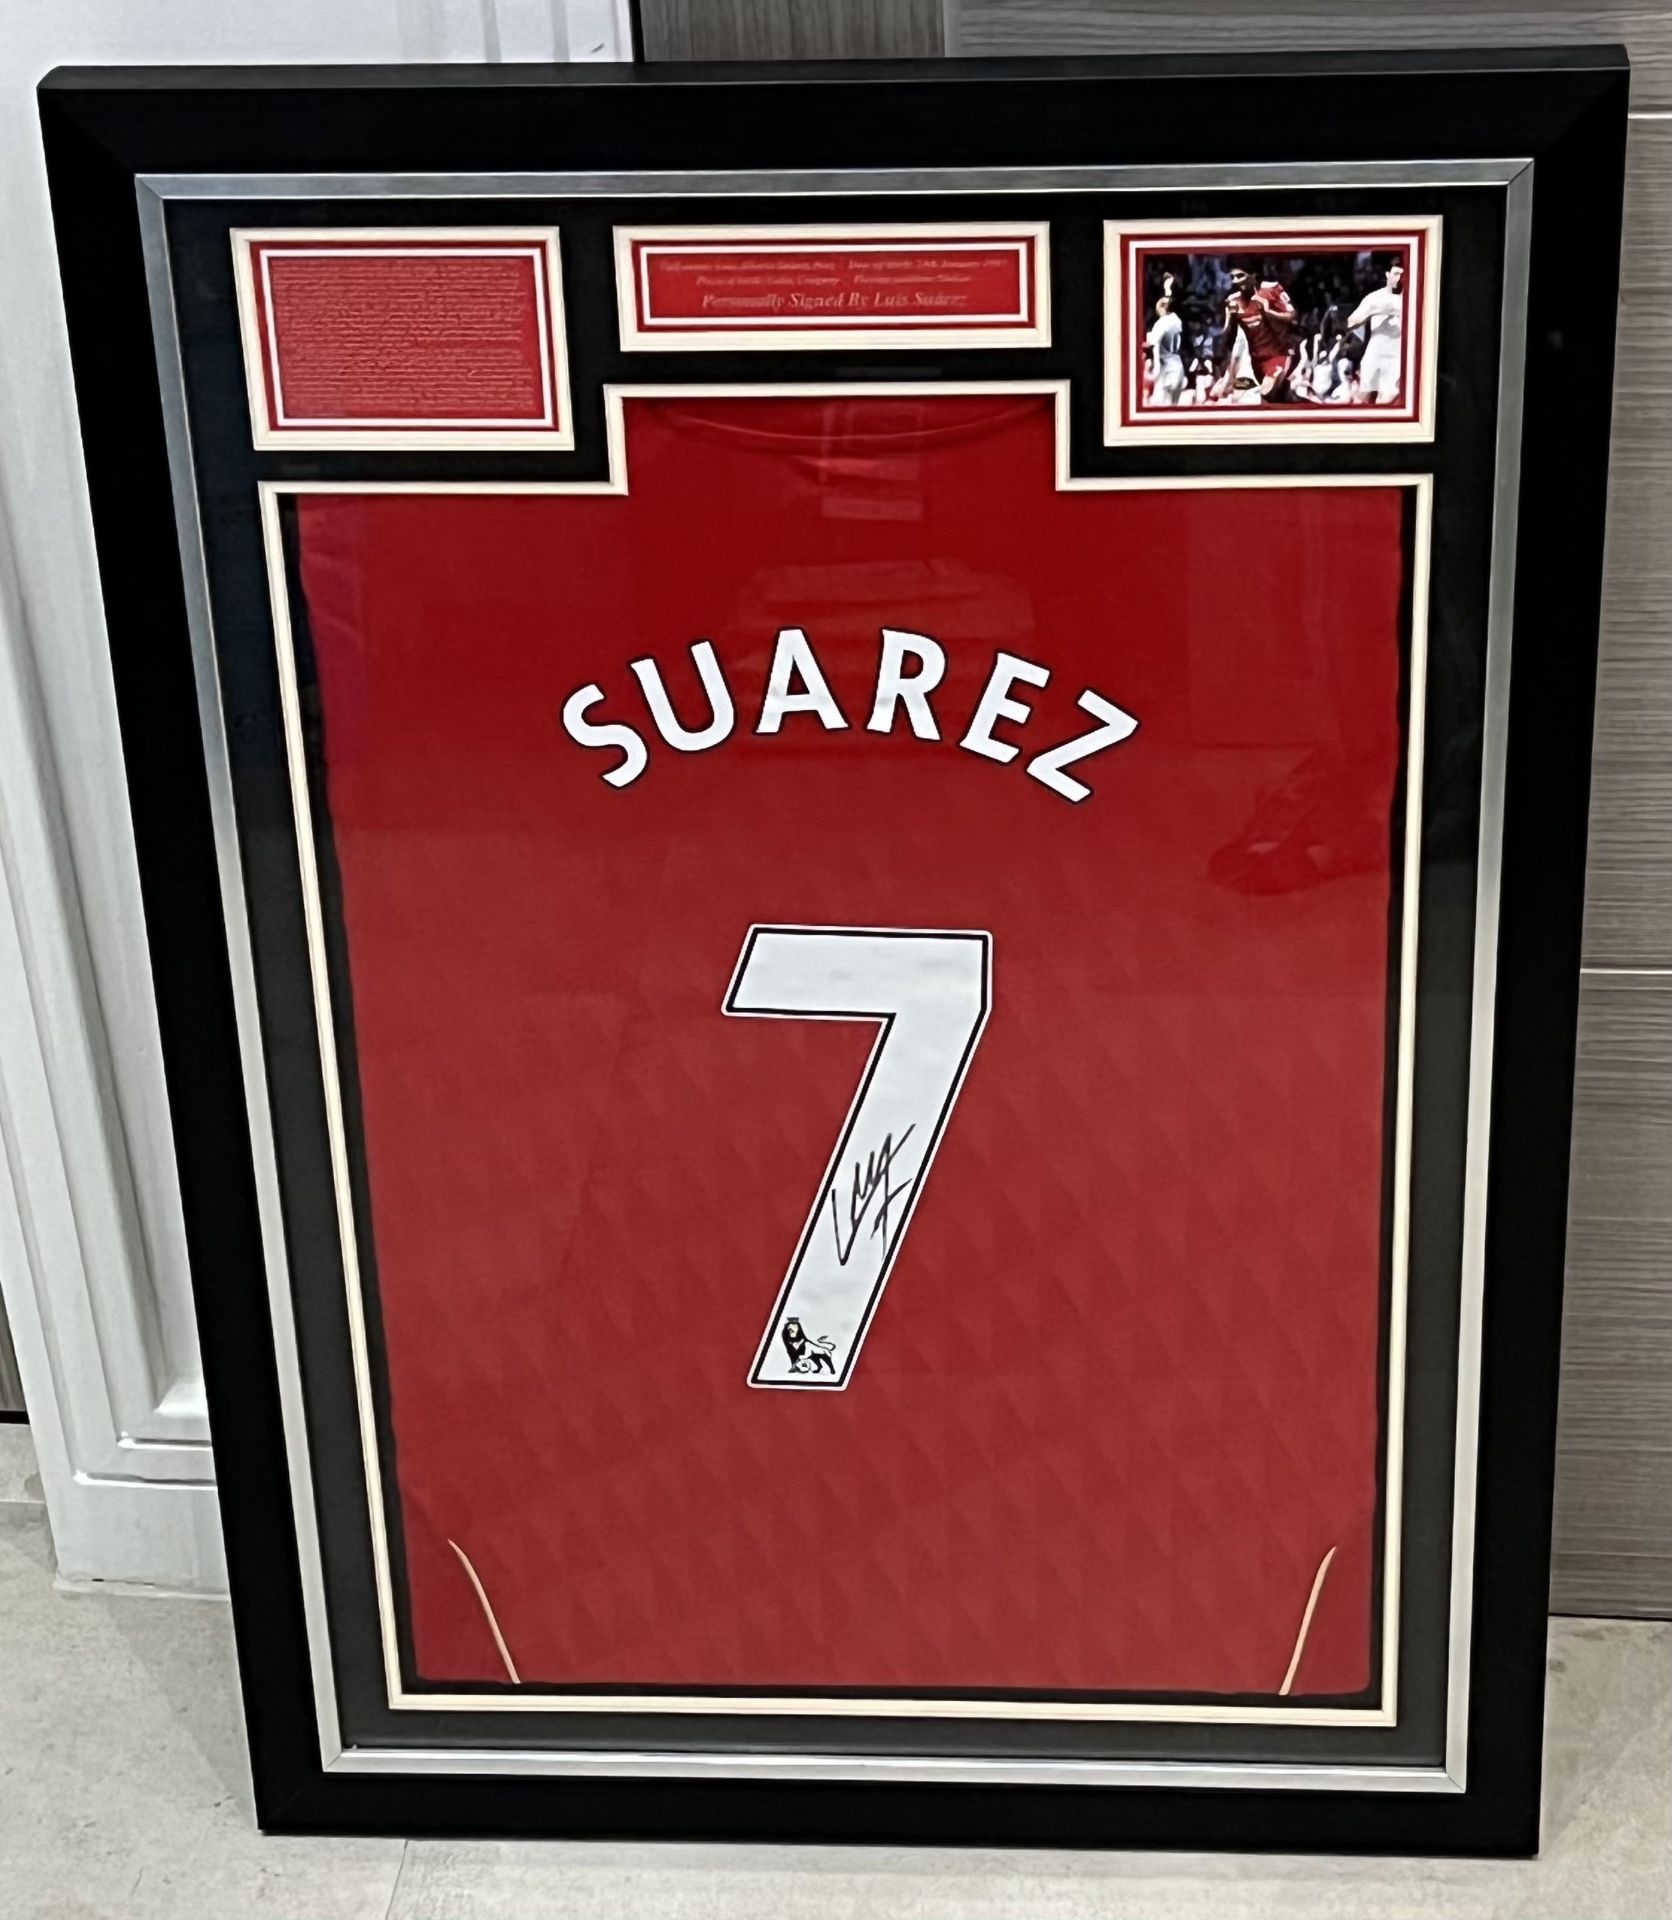 Authentic Luis SuÃ¡rez hand signed Liverypool 7 shirt. The shirt is displayed in a professional